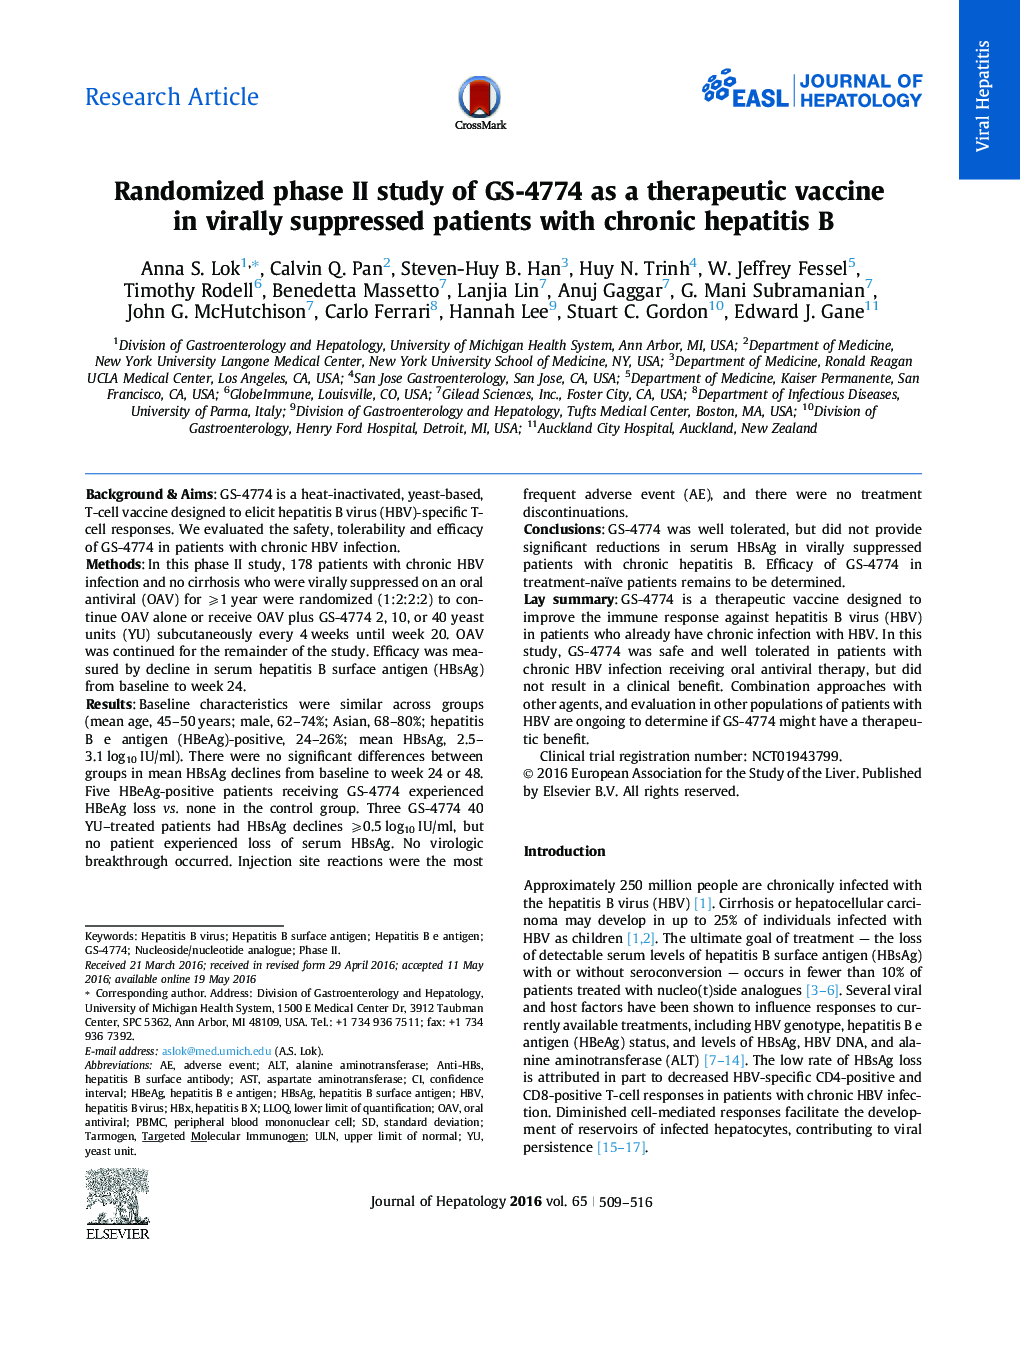 Research ArticleRandomized phase II study of GS-4774 as a therapeutic vaccine in virally suppressed patients with chronic hepatitis B